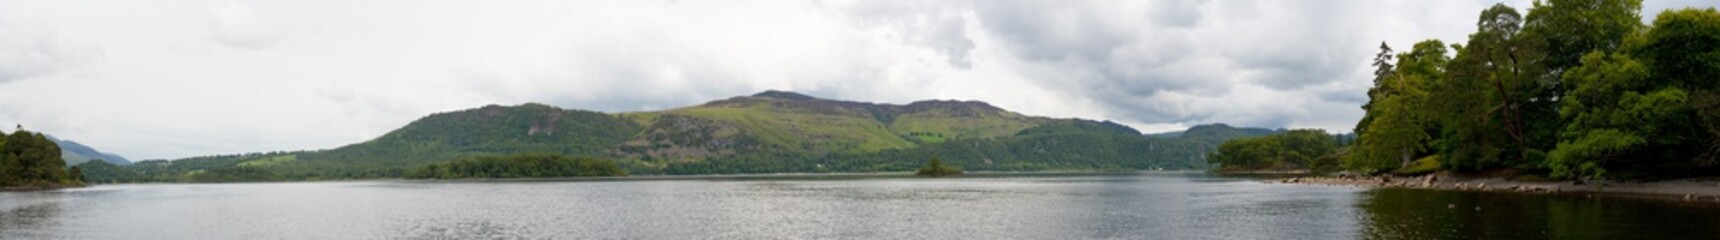 View of Lake from shores of Keswick, England 